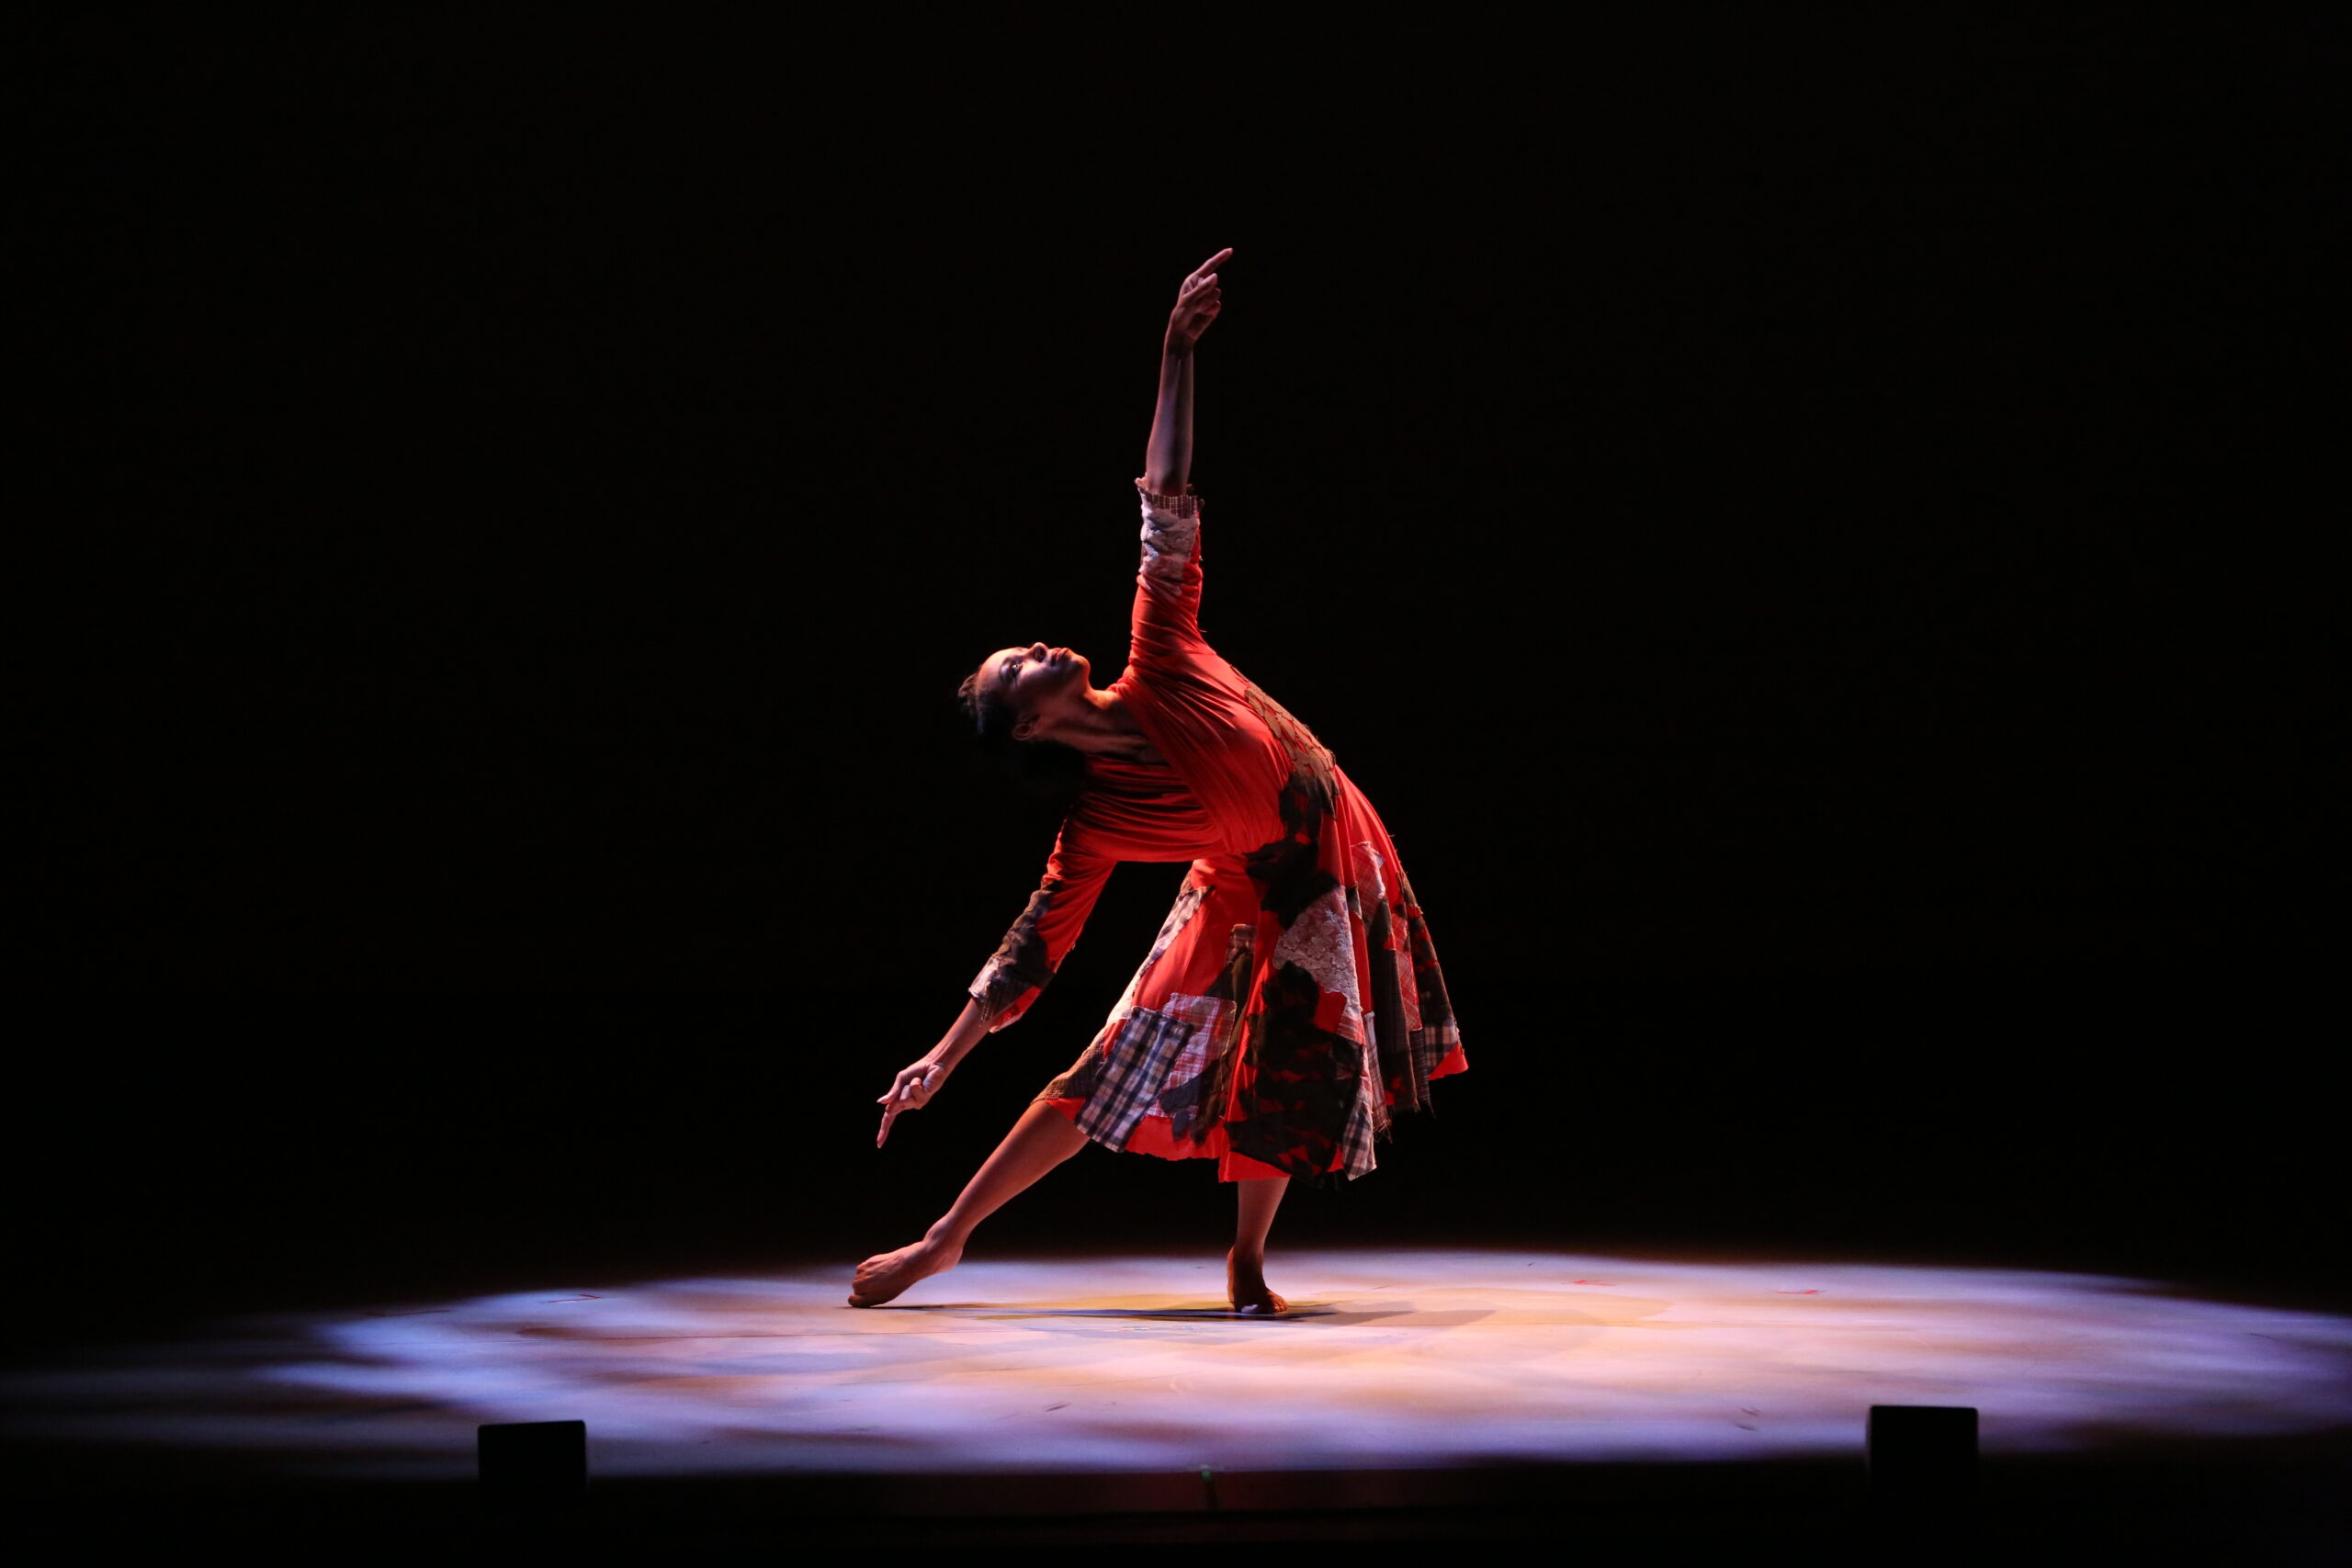 A barefoot dancer caught in a spotlight reaches toward the sky with one arm. She is in plié, one leg extended side so her toes drag along the floor as she bends to the side and reaches. She wears a red dress with large, overlapping patches across the skirt and bodice.